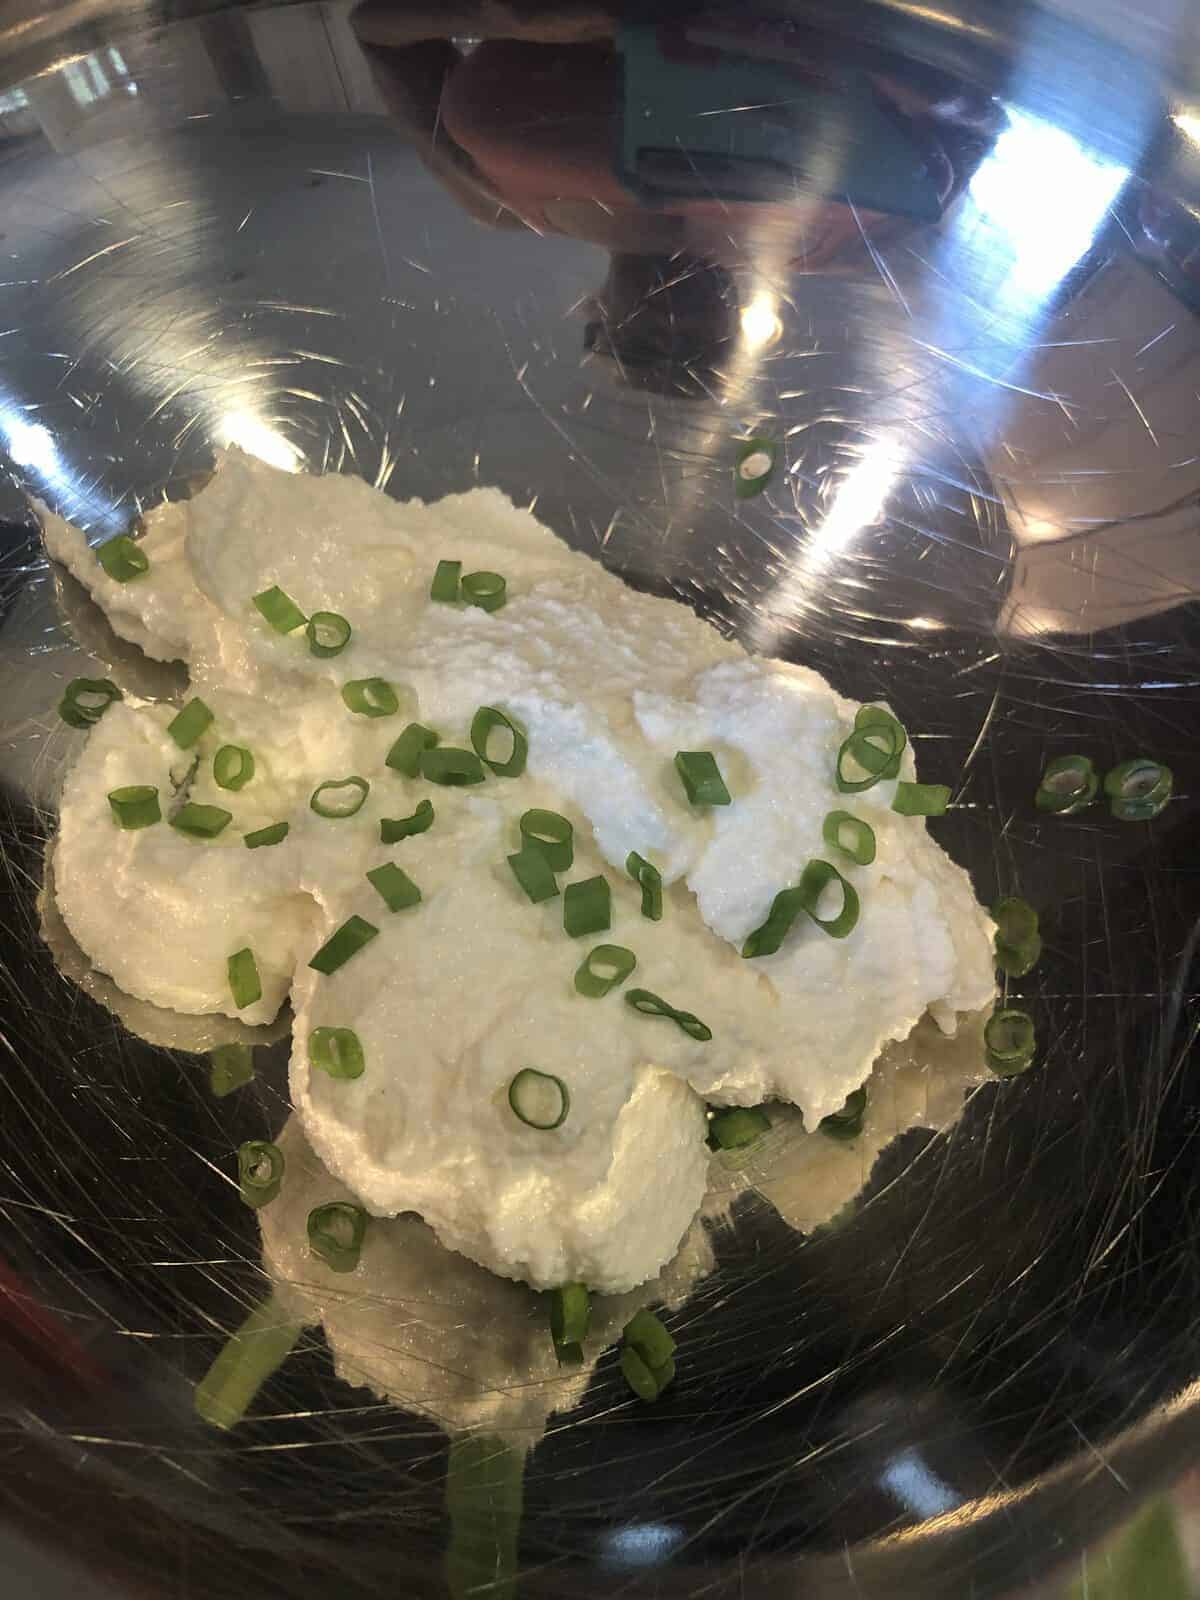 Herbed Ricotta and scallions in a stainless steel bowl